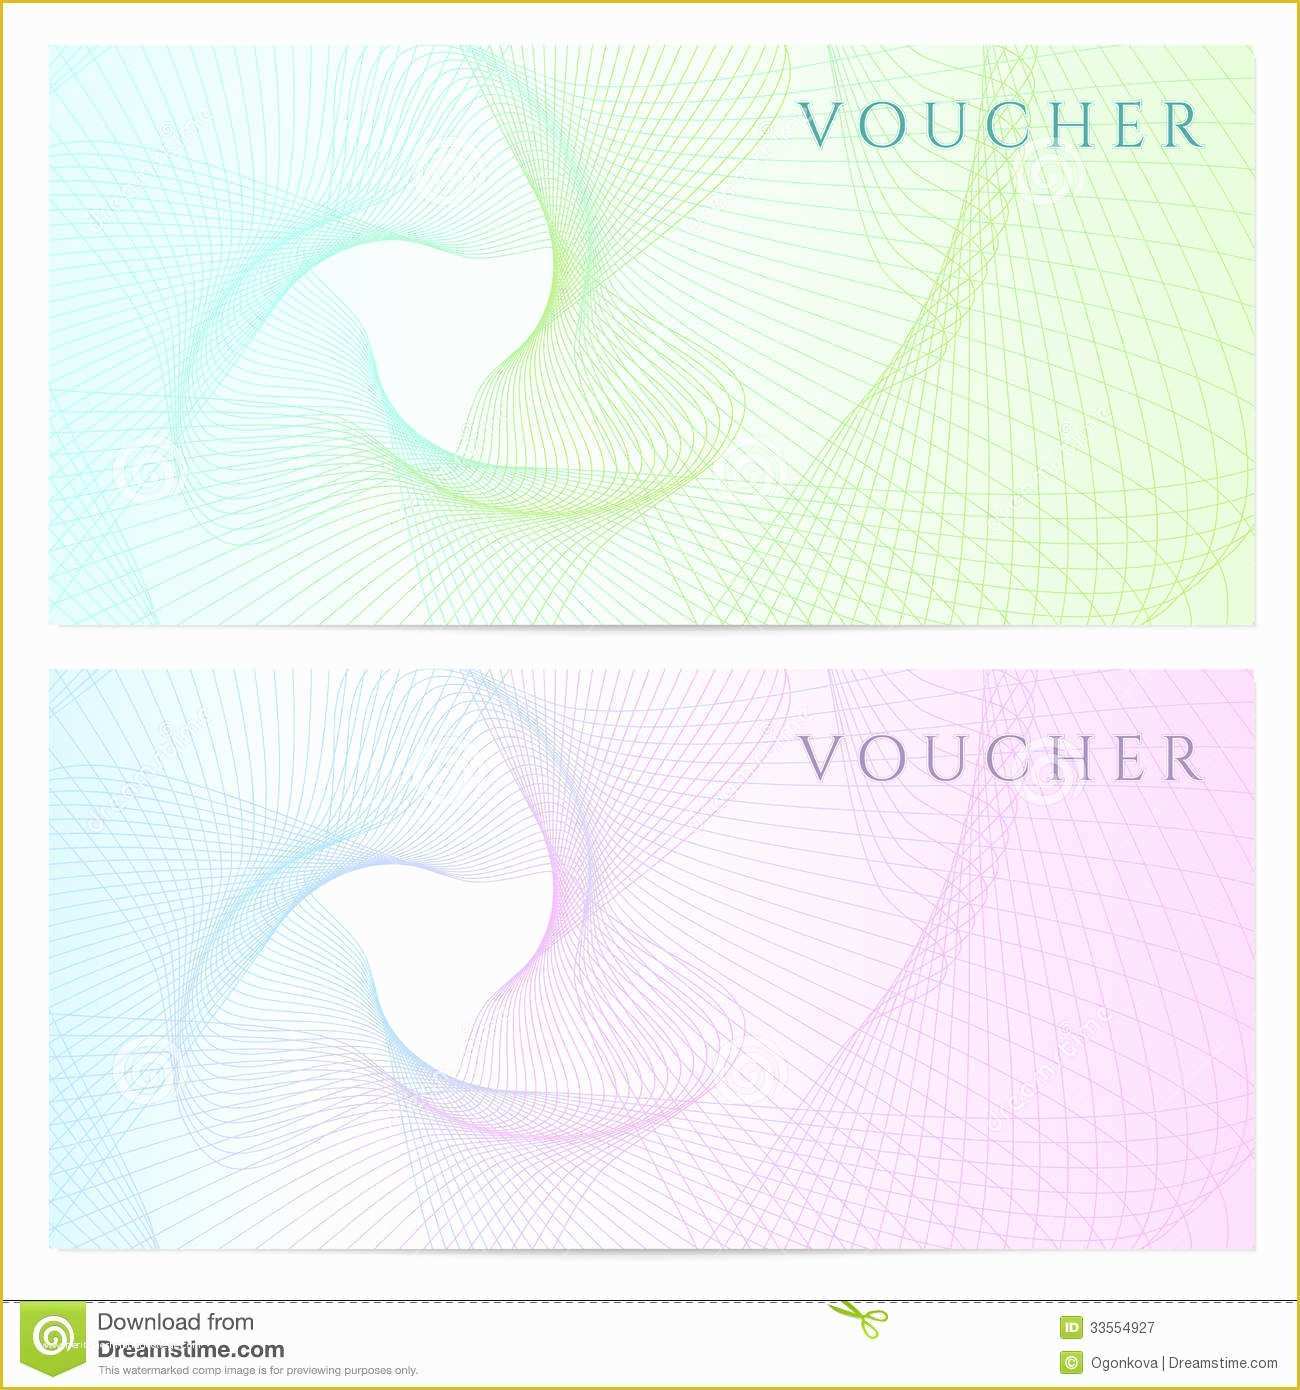 Free Photography Watermark Template Of Gift Certificate Voucher Coupon Template Color Stock